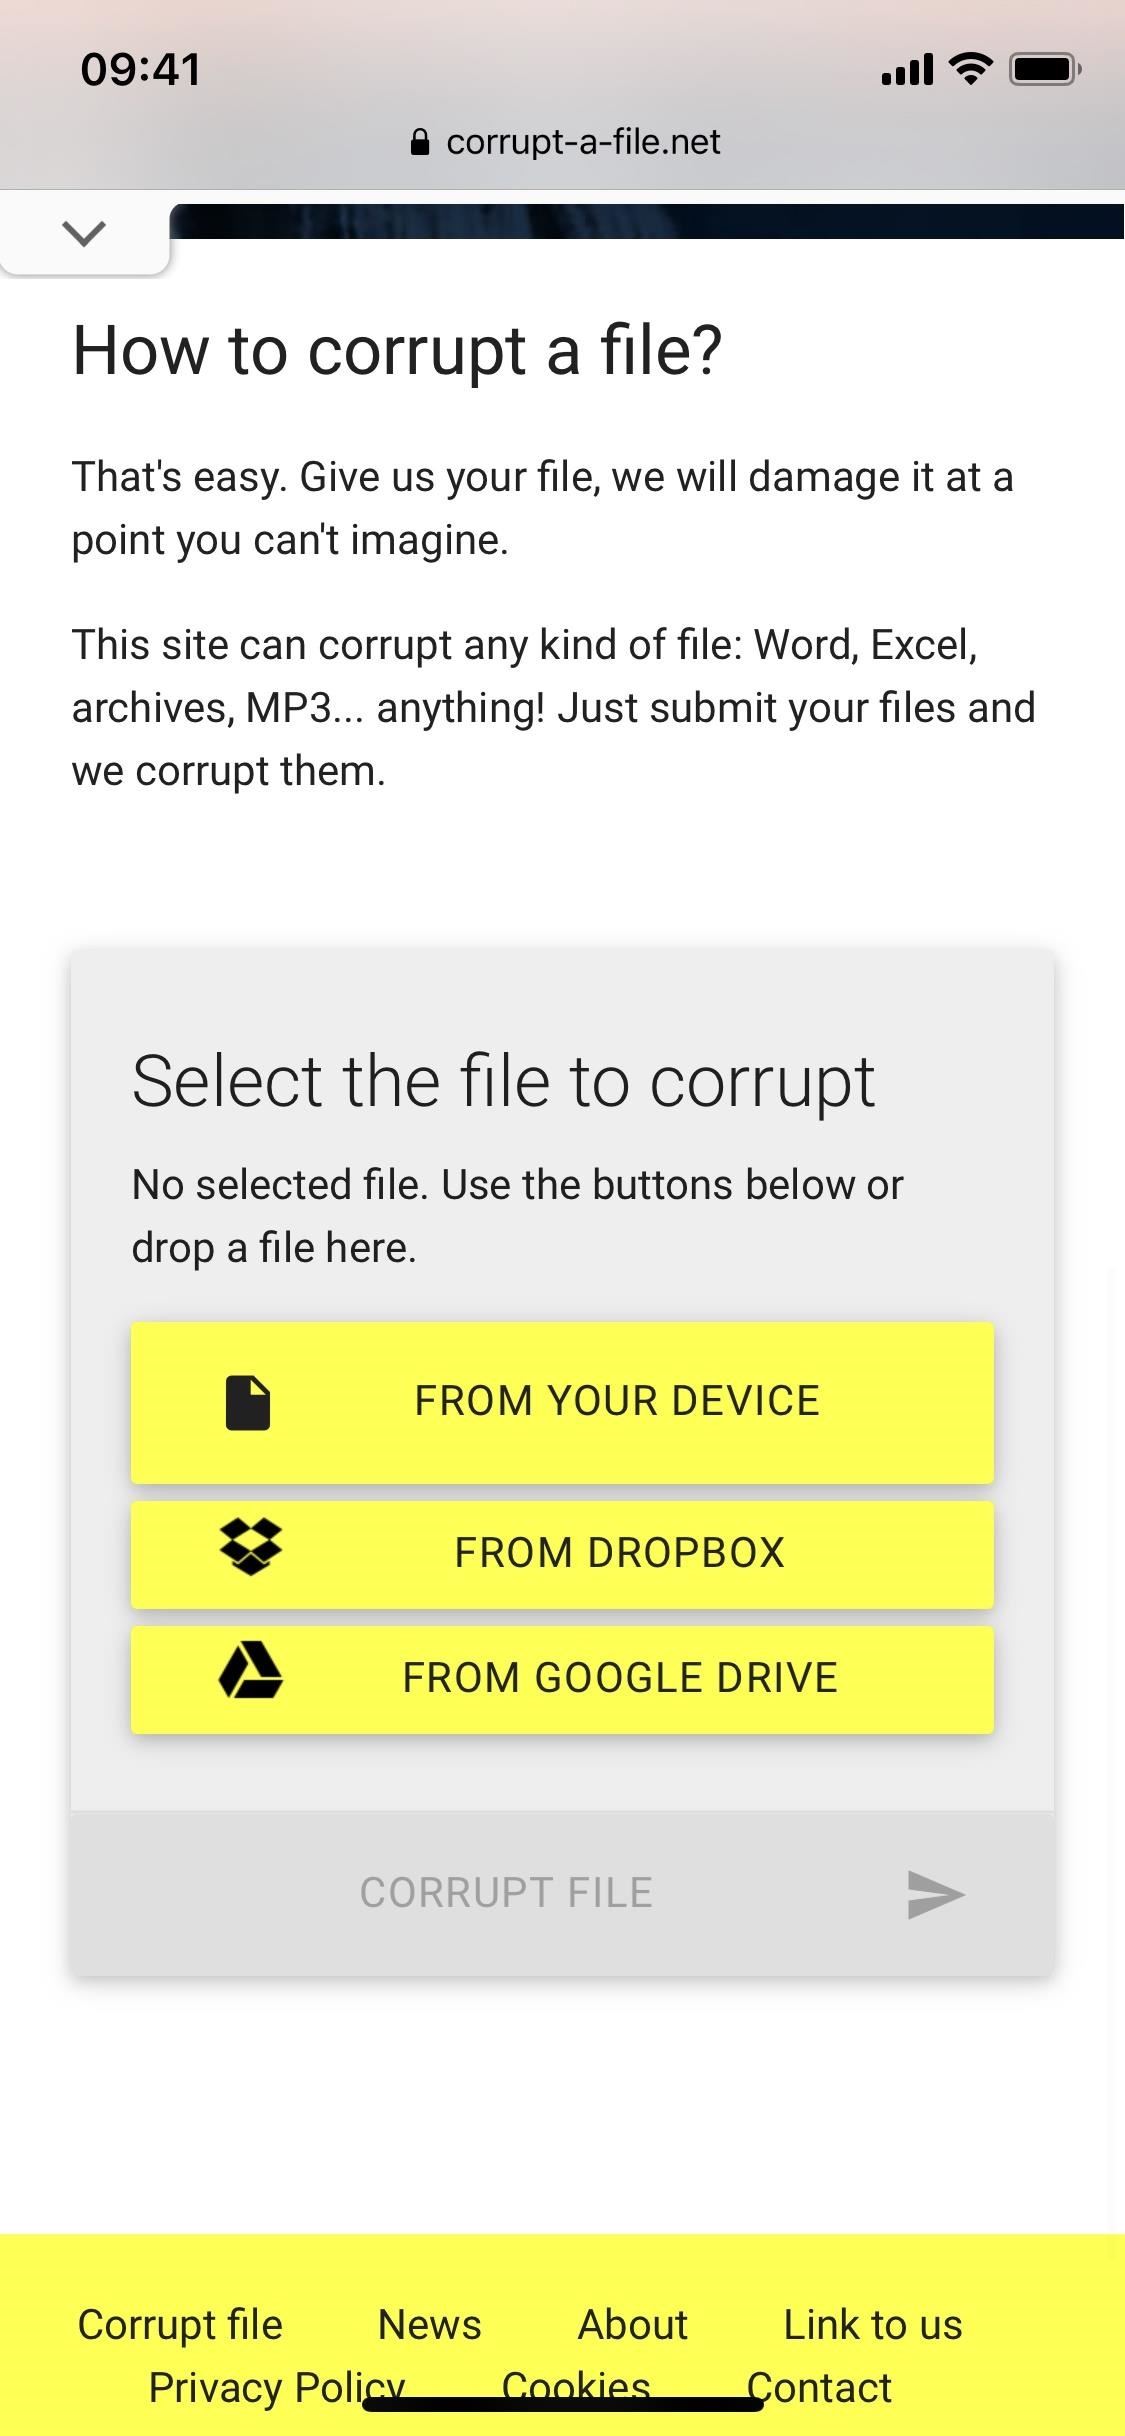 Need More Time on a Work Assignment or School Project? Corrupt Your Files to Extend Your Deadline Without Question